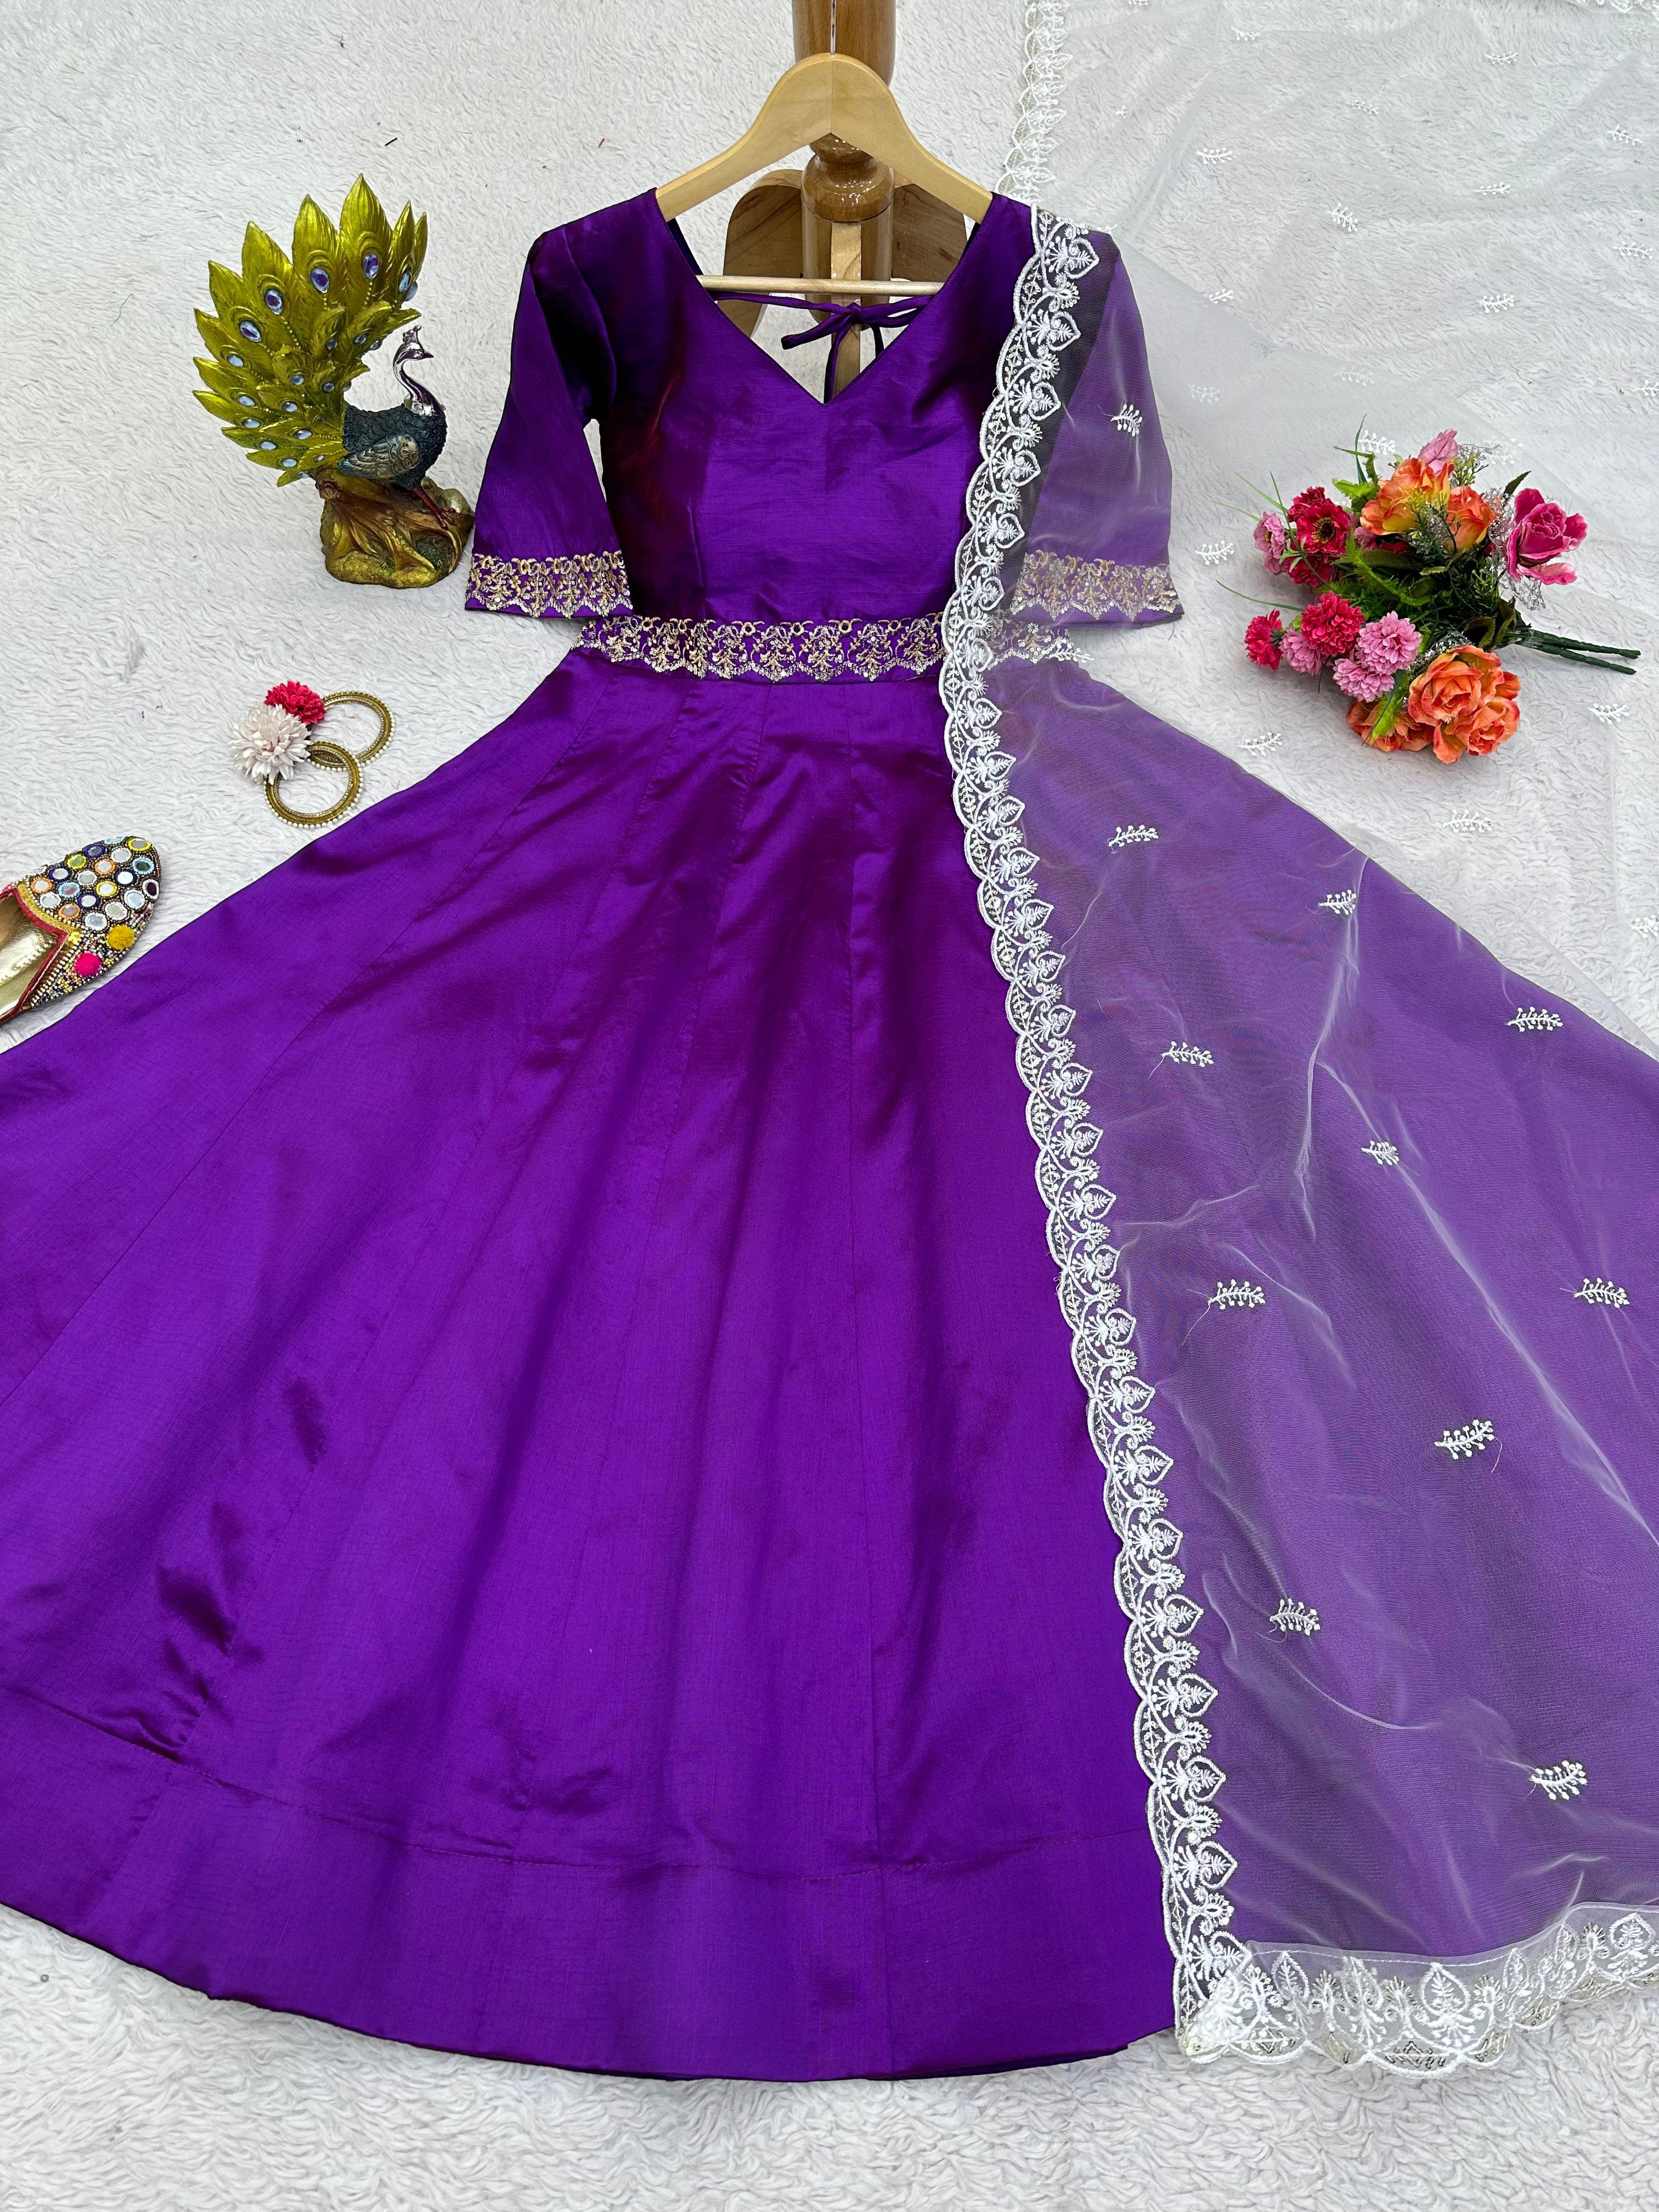 Occasion Wear Purple Color Gown With White Dupatta